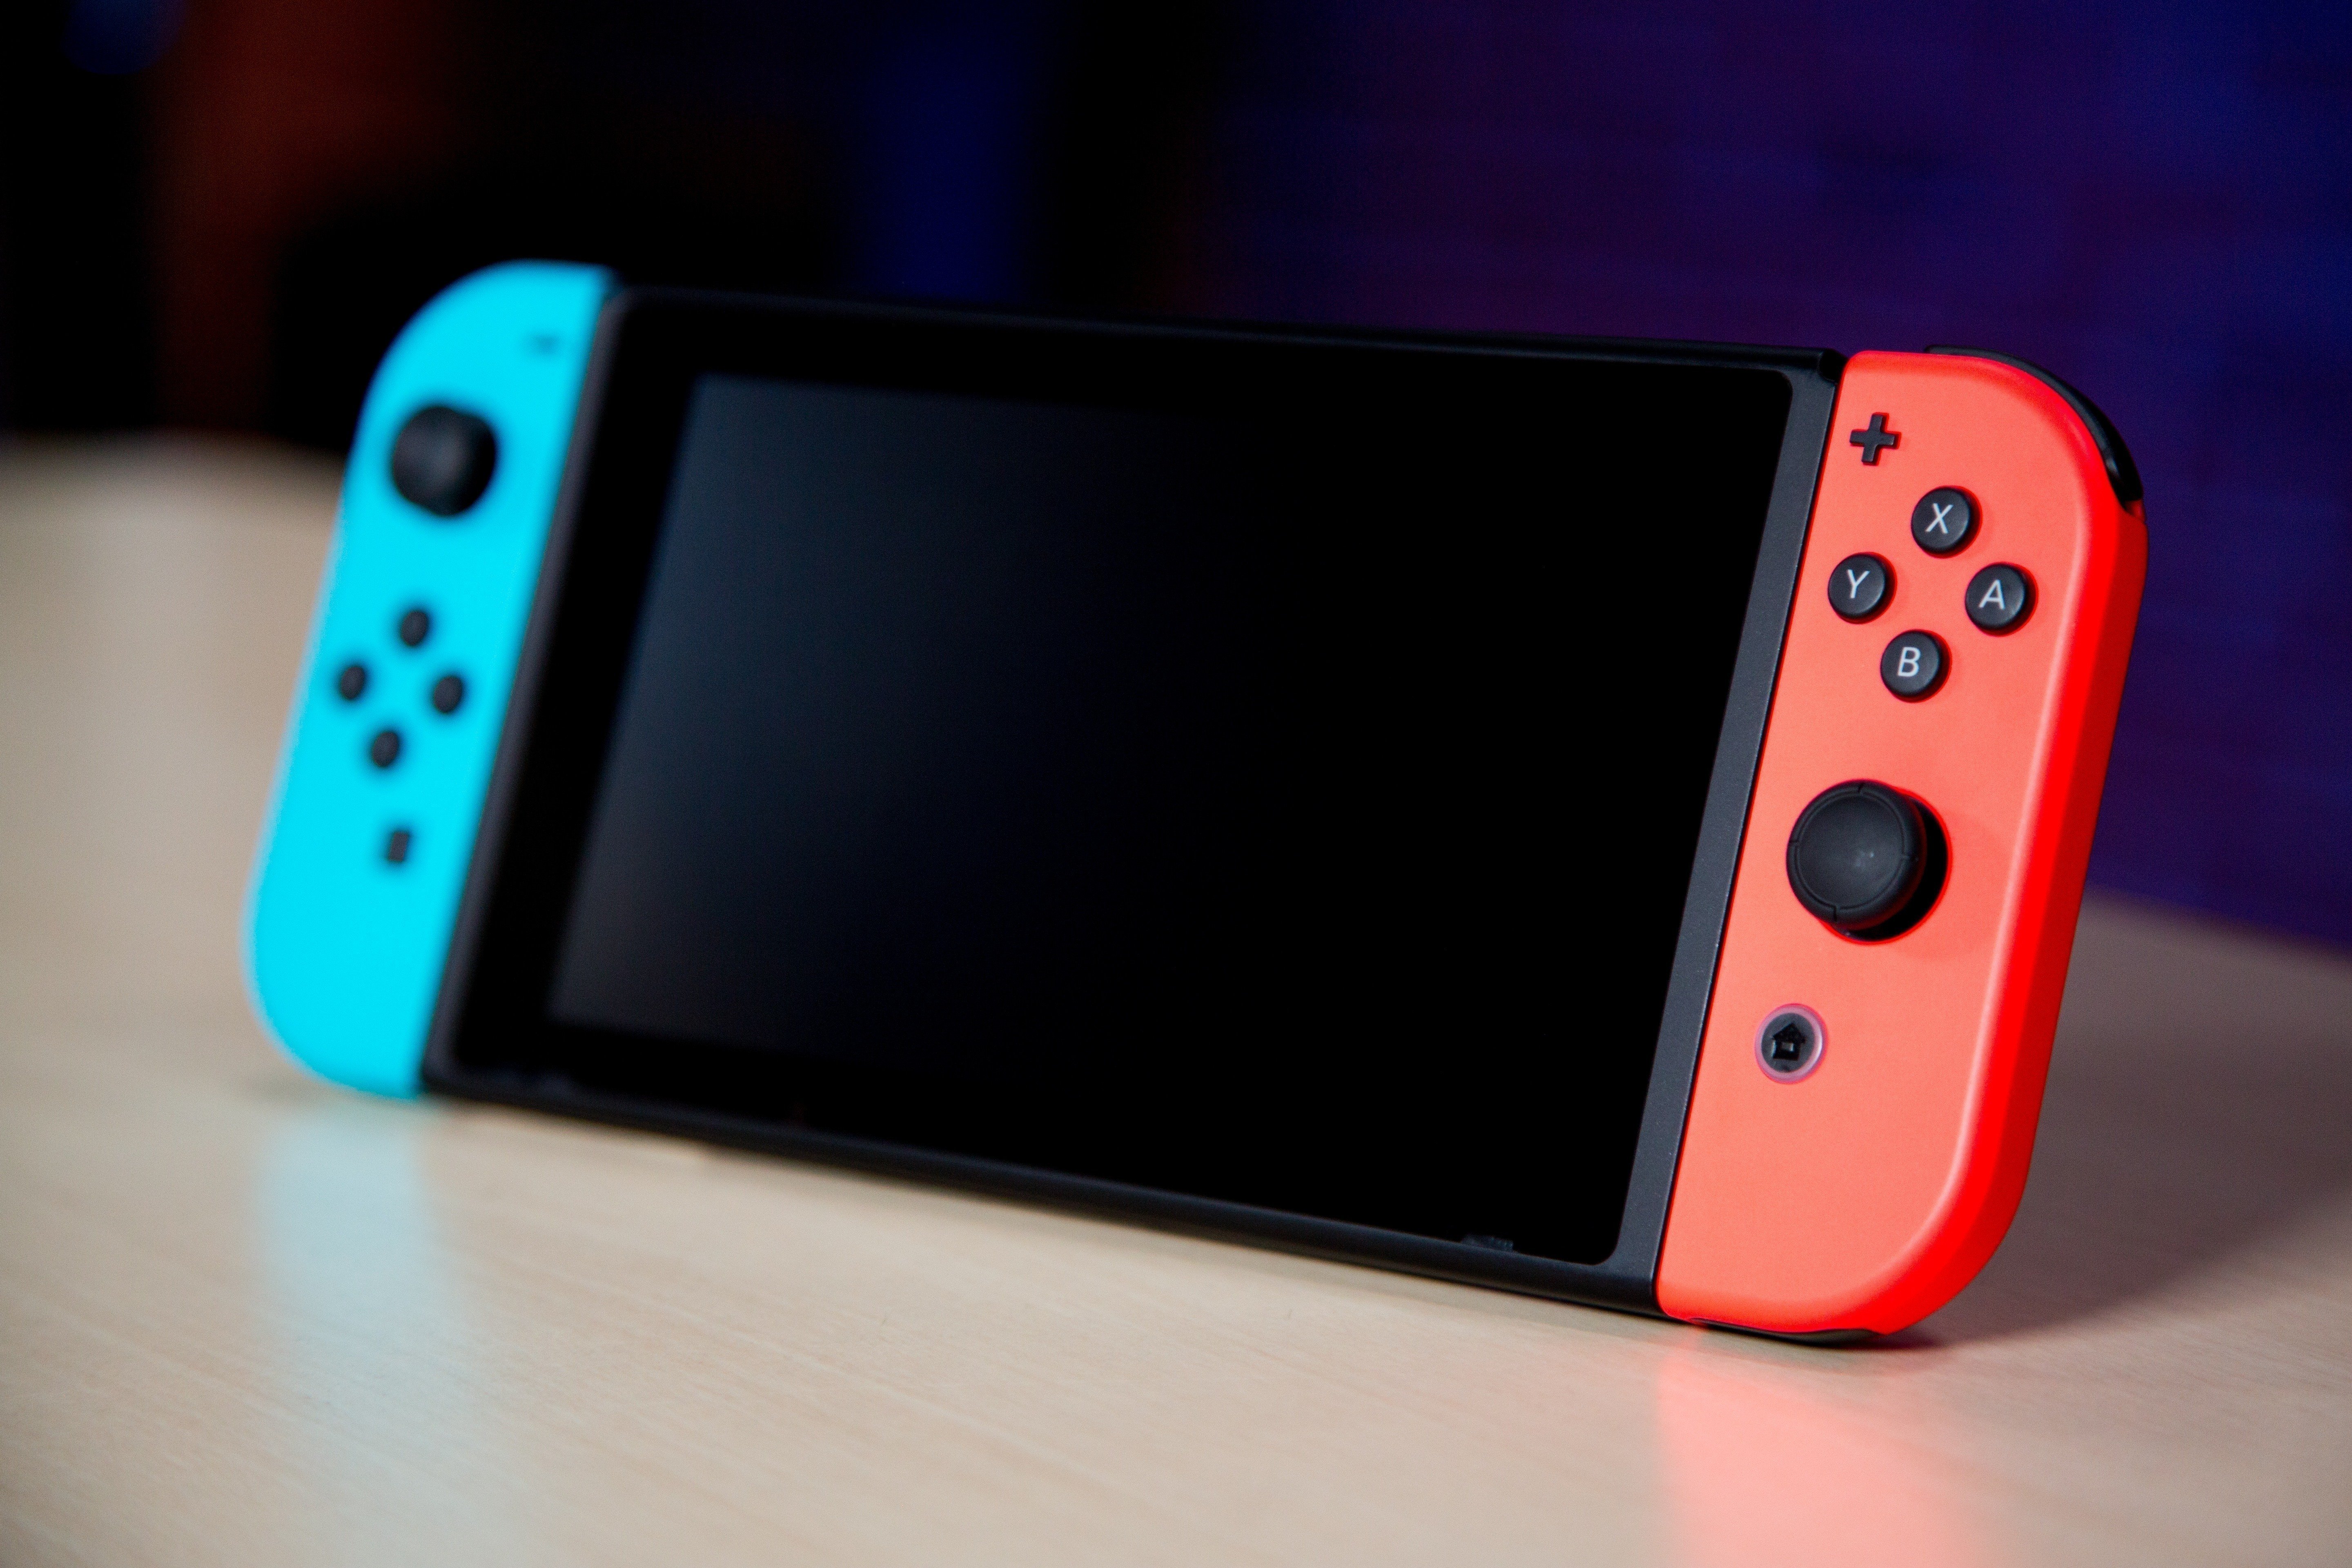 <b>Nintendo Switch</b> <br />  <i>March 3, 2017</i> <br />Originally codenamed NX, the Nintendo Switch console is Nintendo’s seventh home system and the first home console in 20 years to use cartridges instead of optical discs. It debuted on March 3 with a little over a dozen launch titles, including the highly anticipated Legend of Zelda: Breath of the Wild.  If you'd like to purchase a Nintendo Switch, <a  data-cke-saved-href=